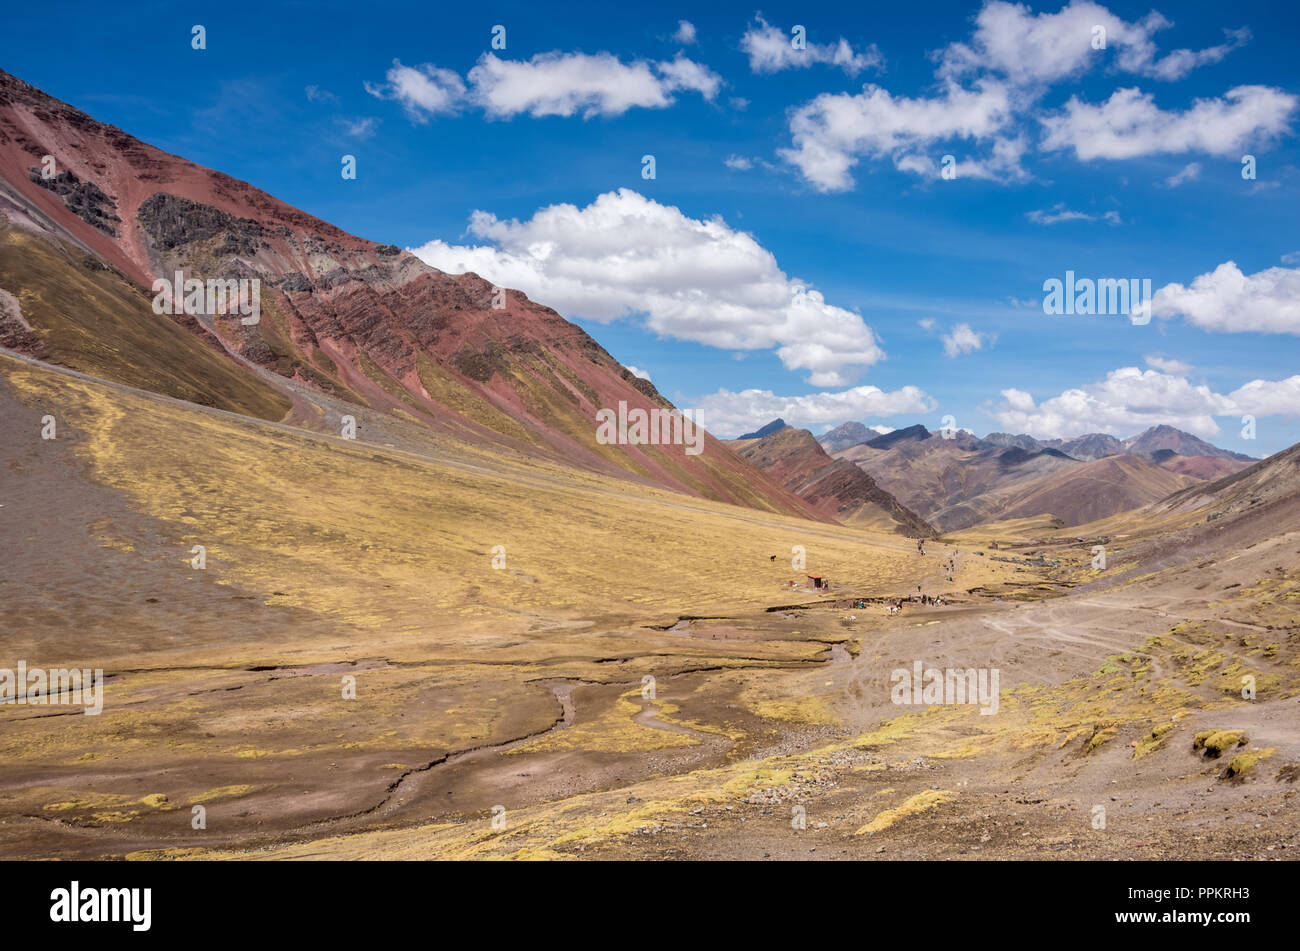 Andean landscape on the way back from the Rainbow Mountains, Andes, Peru. Stock Photo